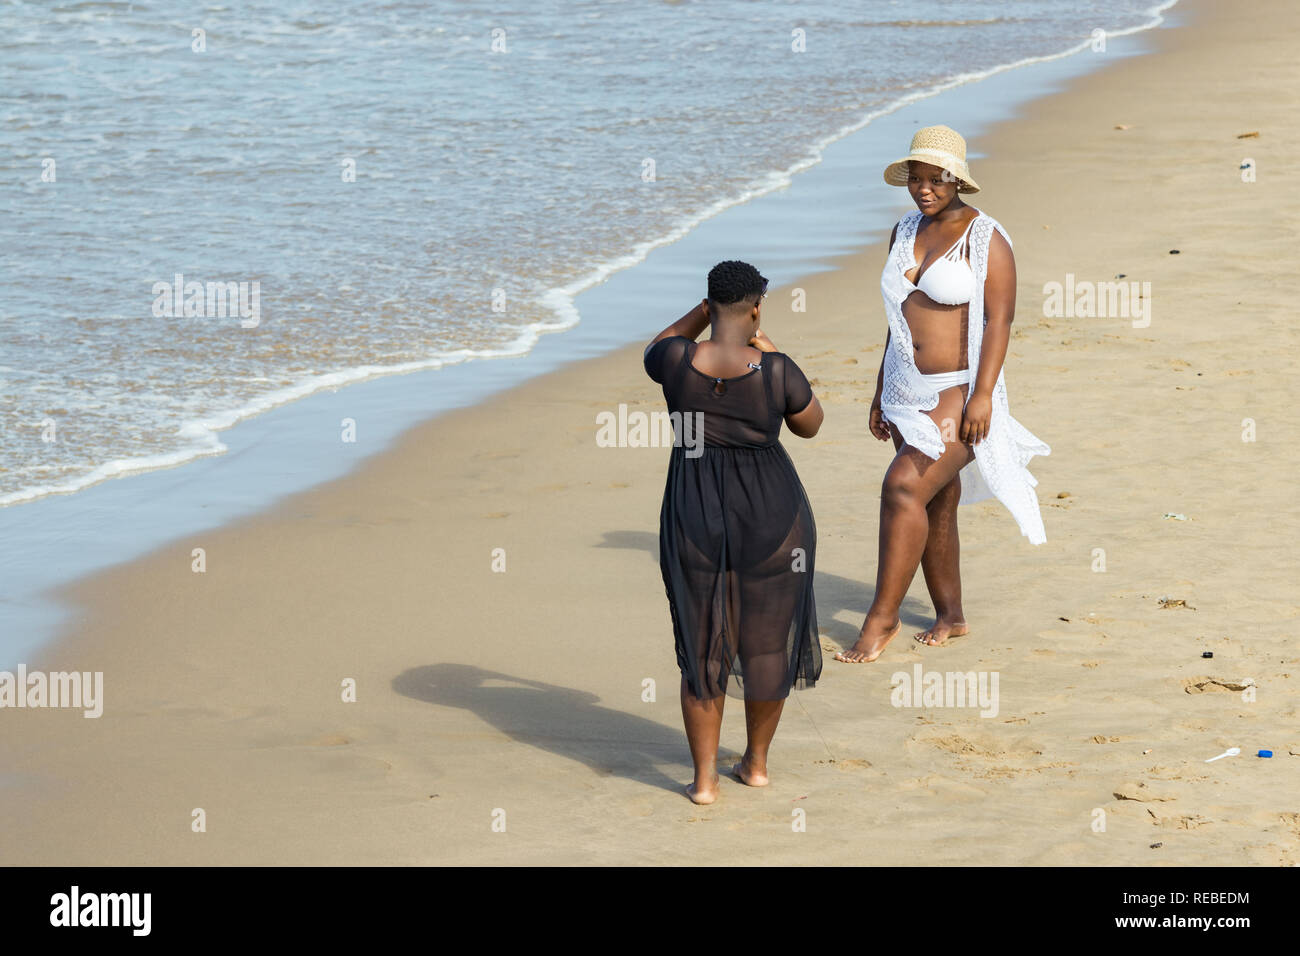 An oversize tall black woman wearing a white bikini and hat posing for her friend who takes her photos in the beach in Durban, South Africa. Stock Photo